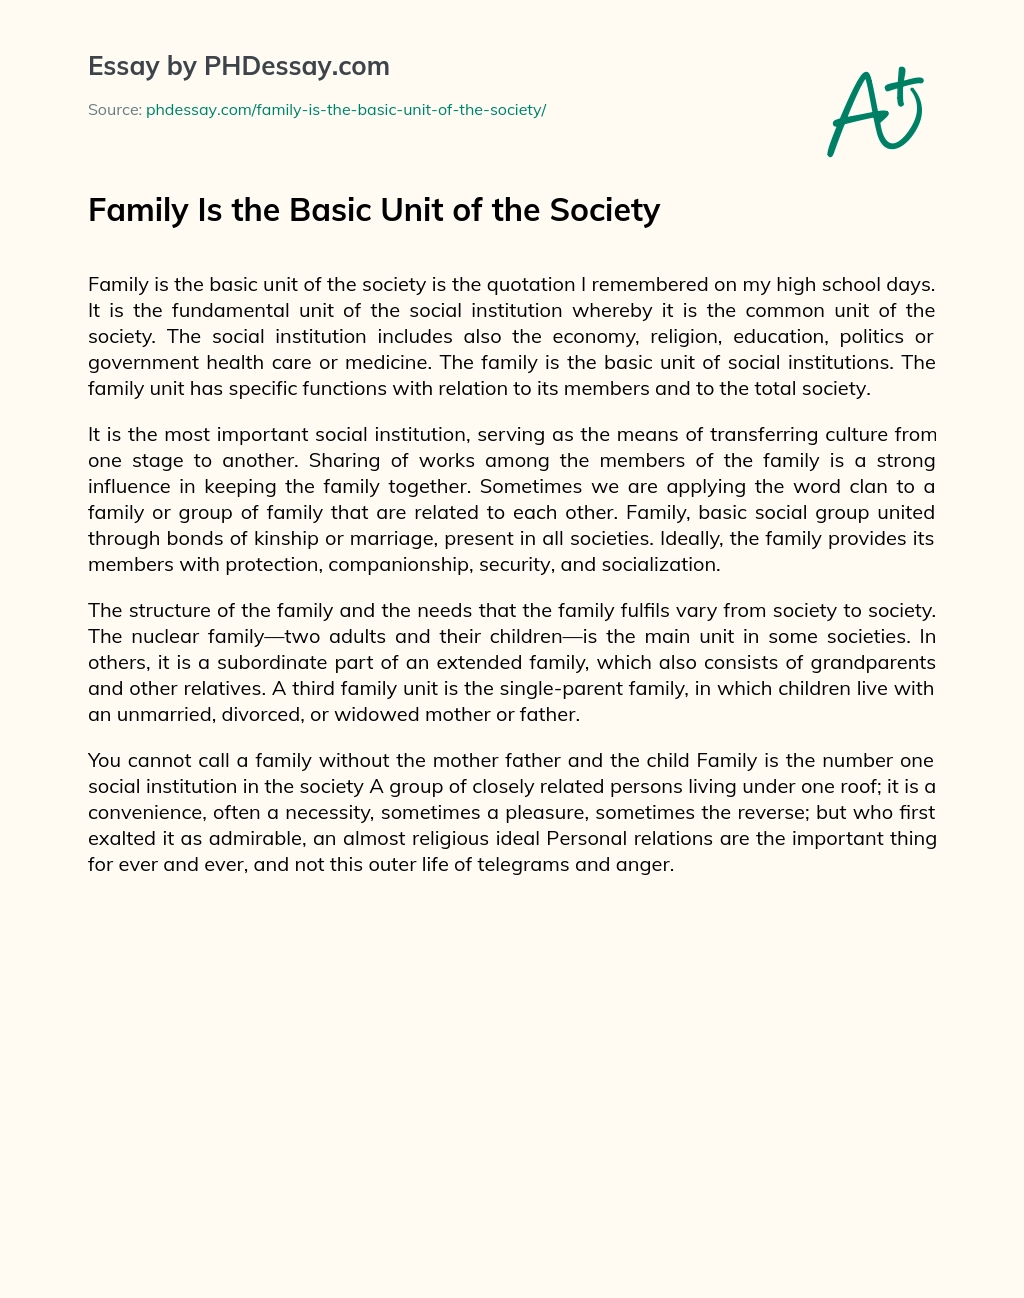 Family Is the Basic Unit of the Society (1)